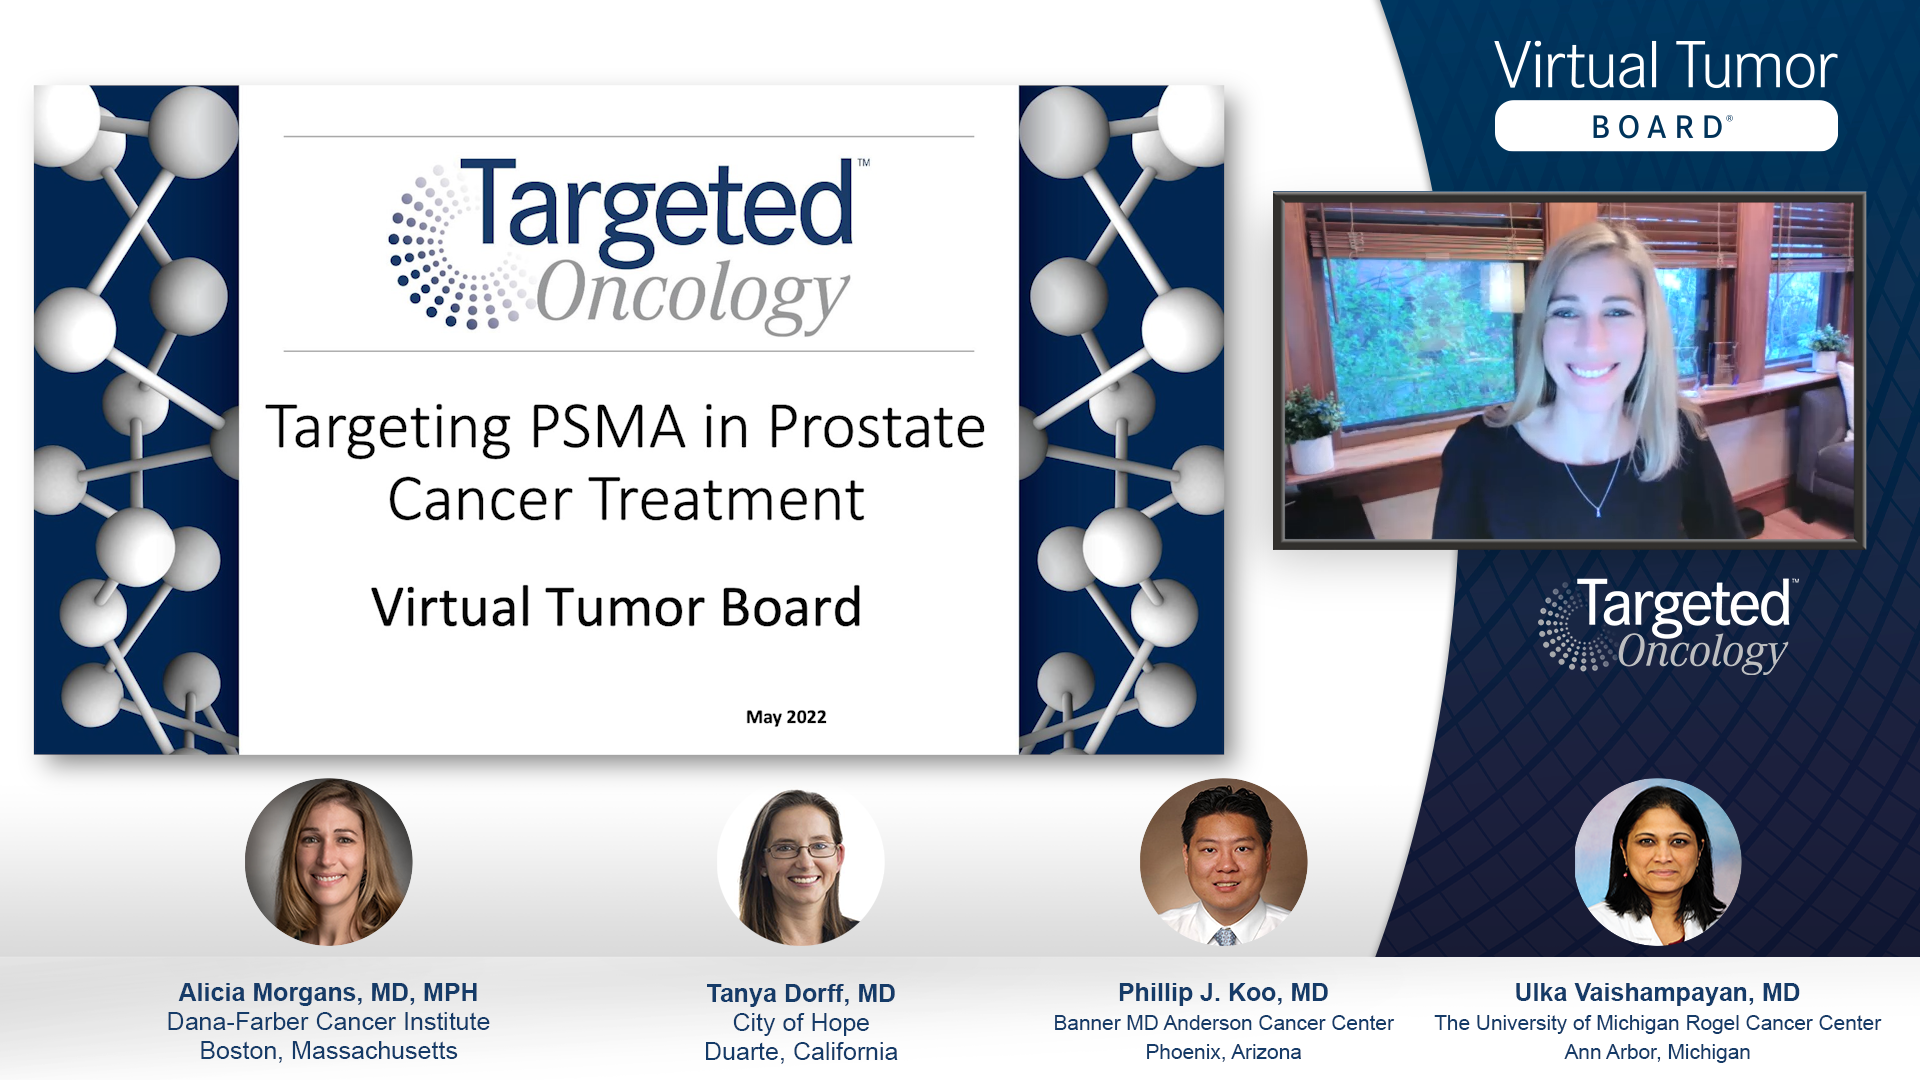 Lutetium-PSMA-617 and Novel Agents in Prostate Cancer